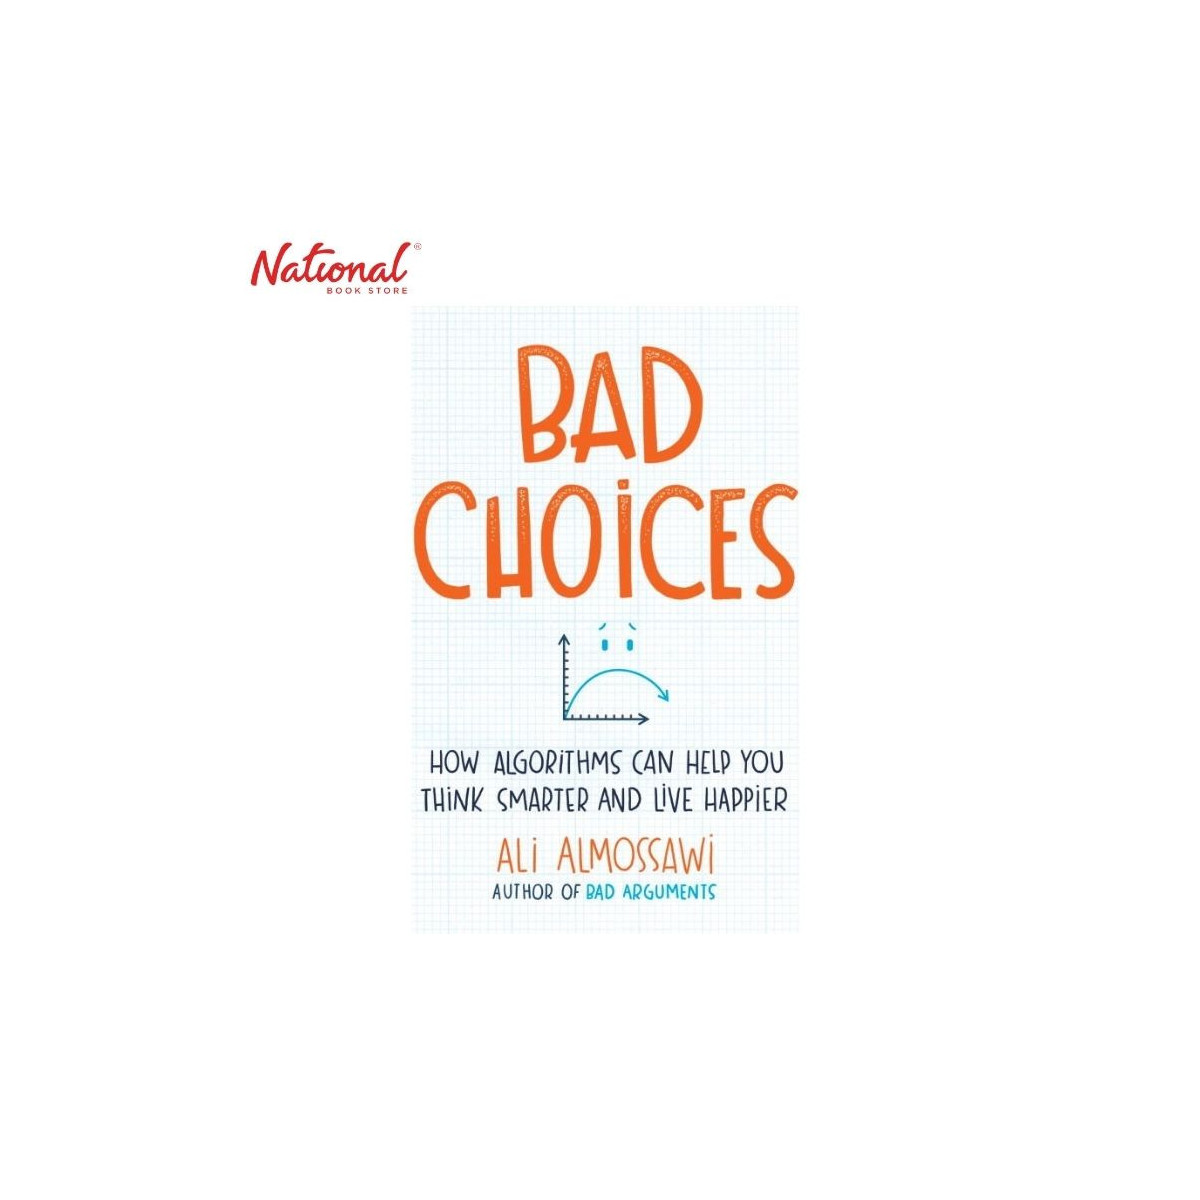 Bad Choices Hardcover by Ali Almossawi